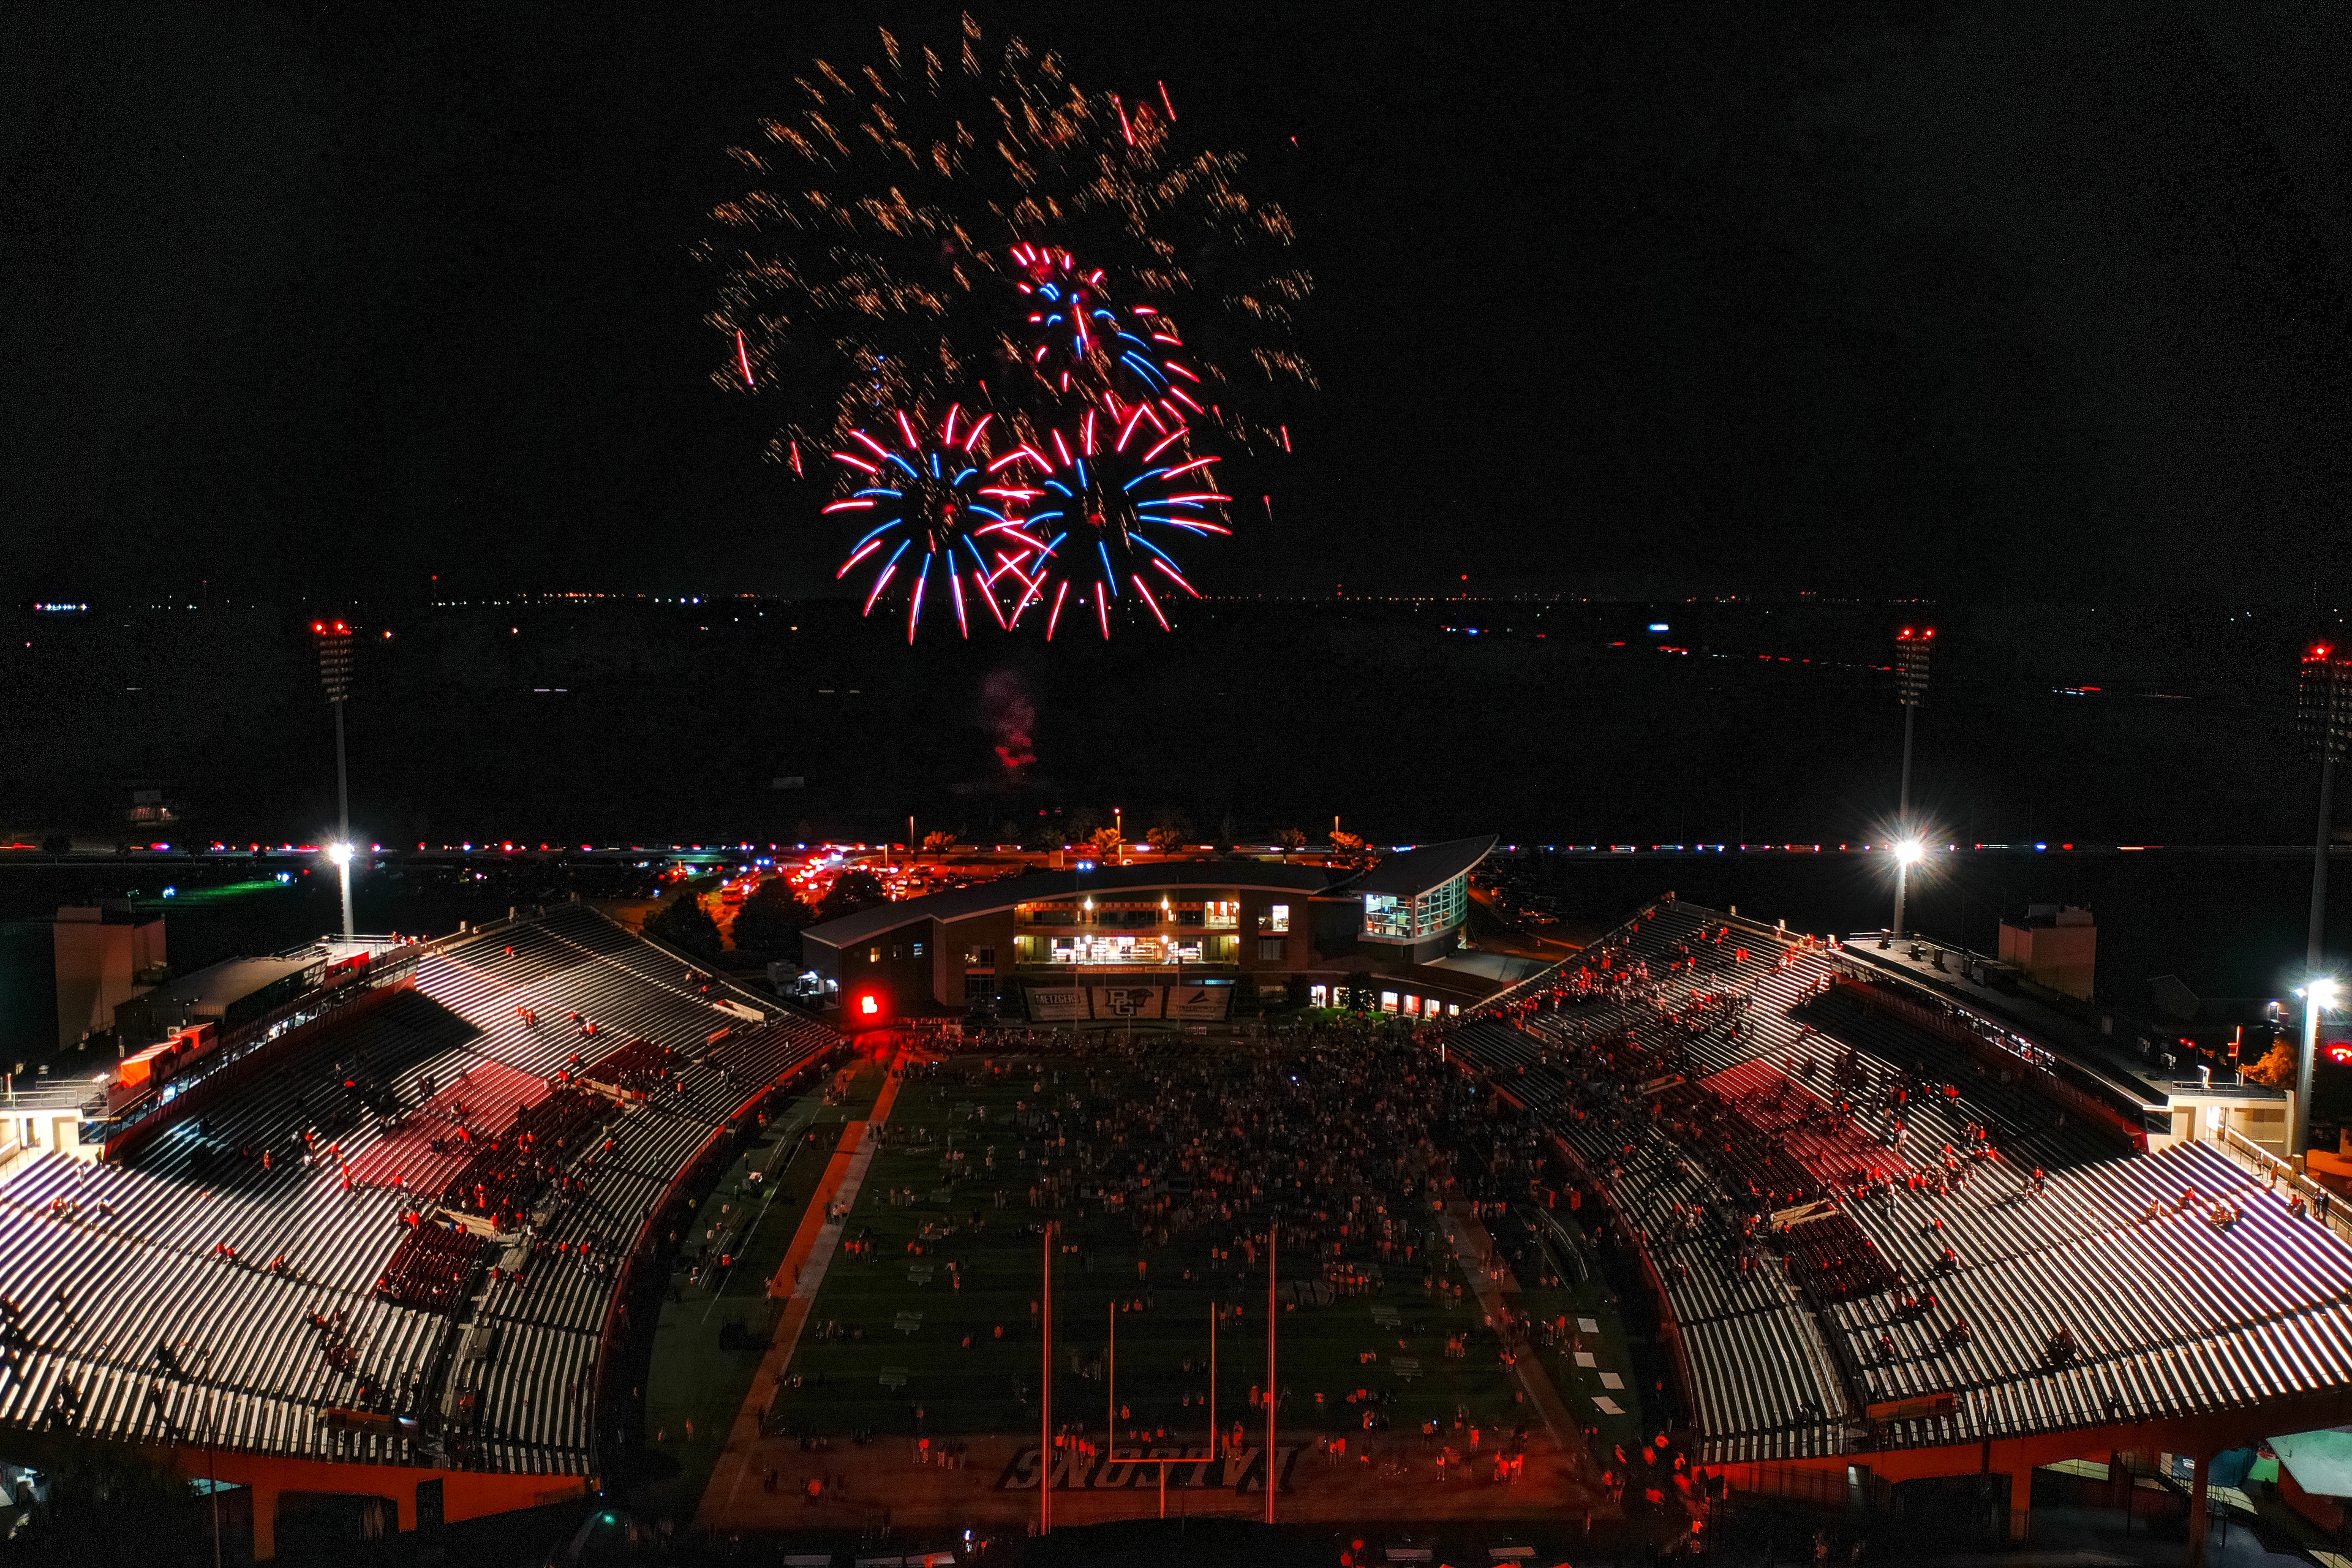 Fireworks thunder overhead at Doyt L. Perry stadium to cap off the 100th homecoming.